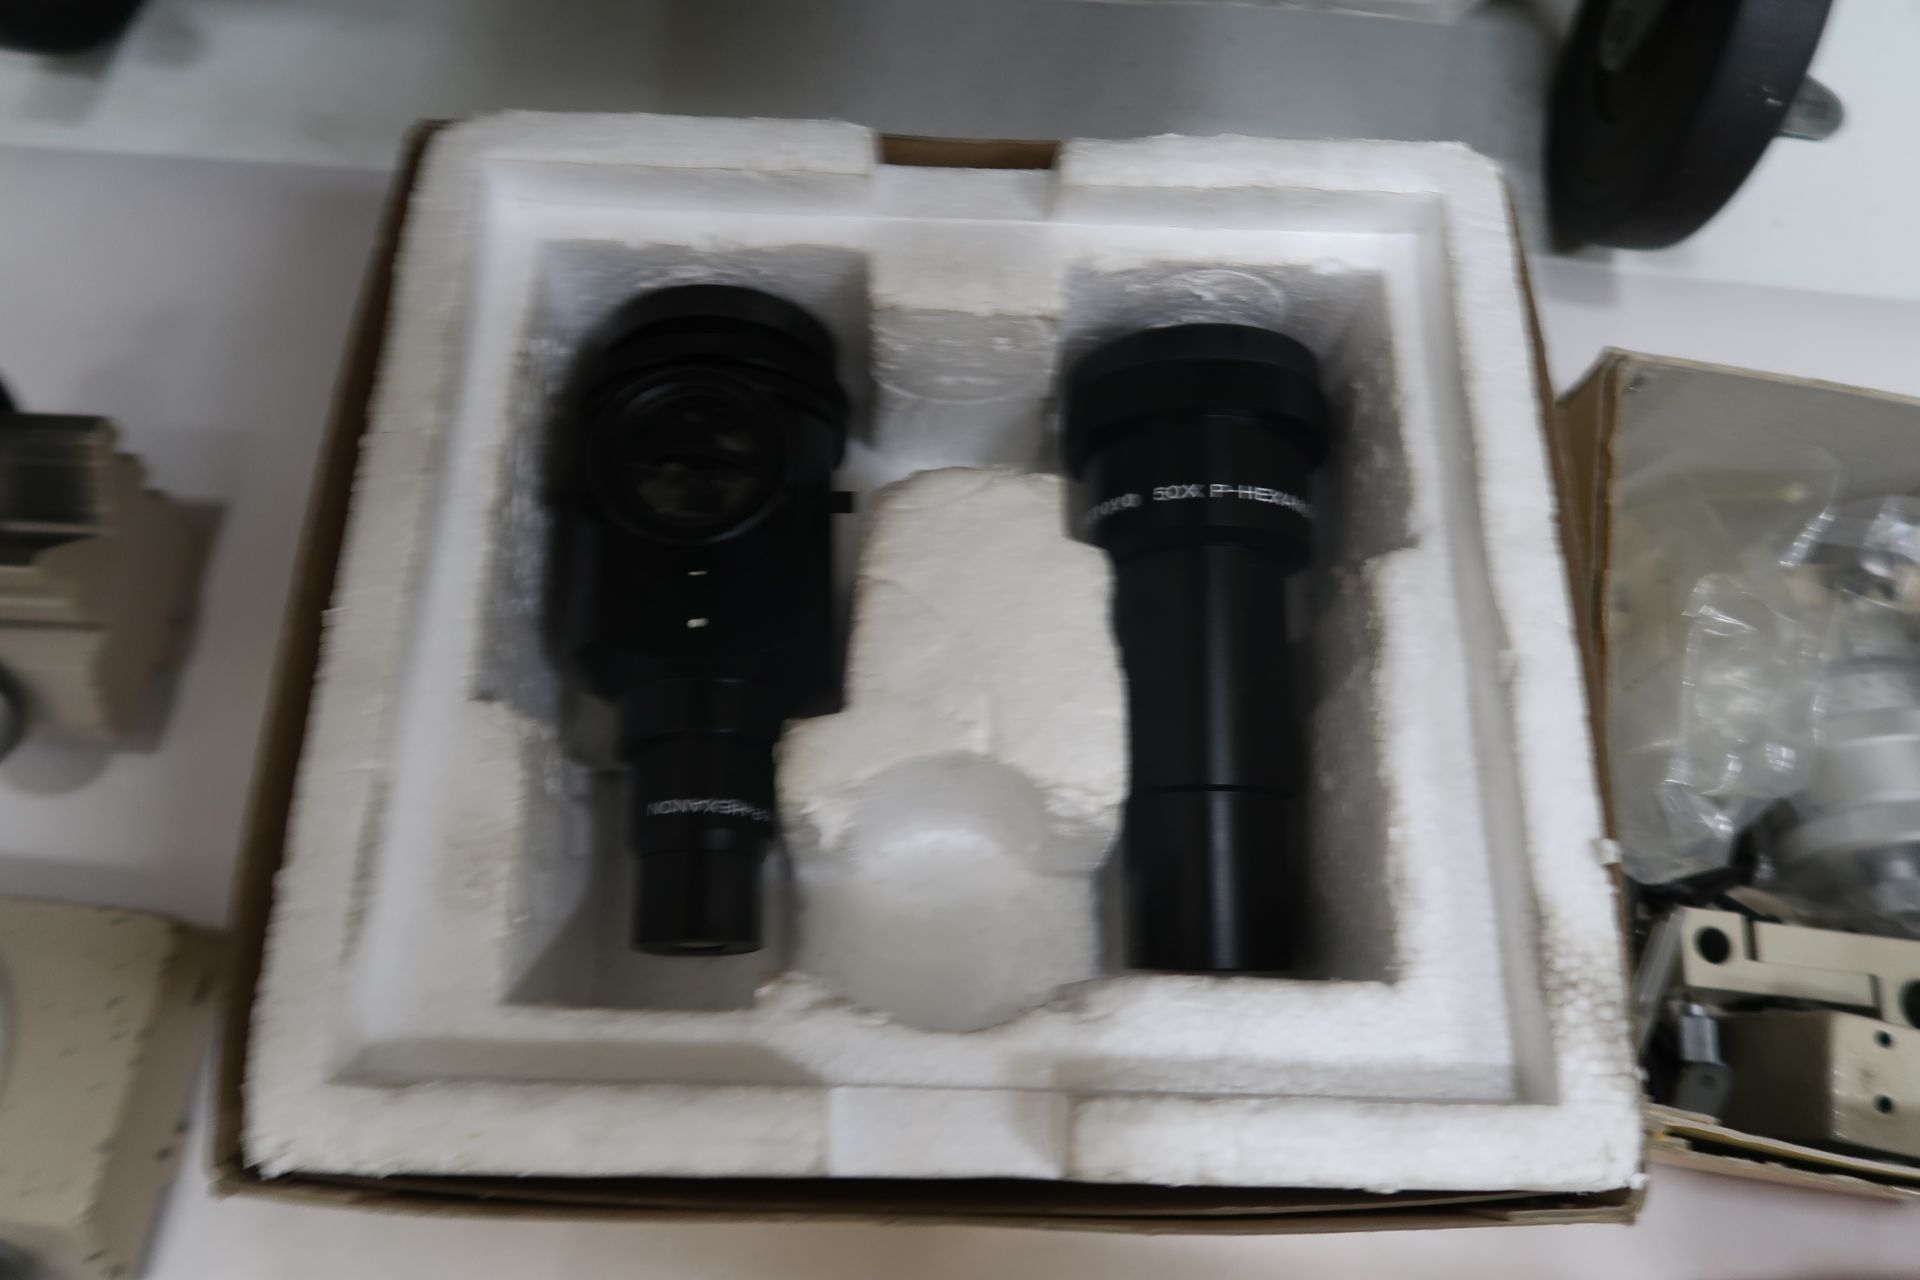 Mitutoyo PH-350 13” Optical Comparator s/n 60093 w/ Mitutoyo DRO, Mitutoyo M1 Edge Zone, SOLD AS IS - Image 16 of 18